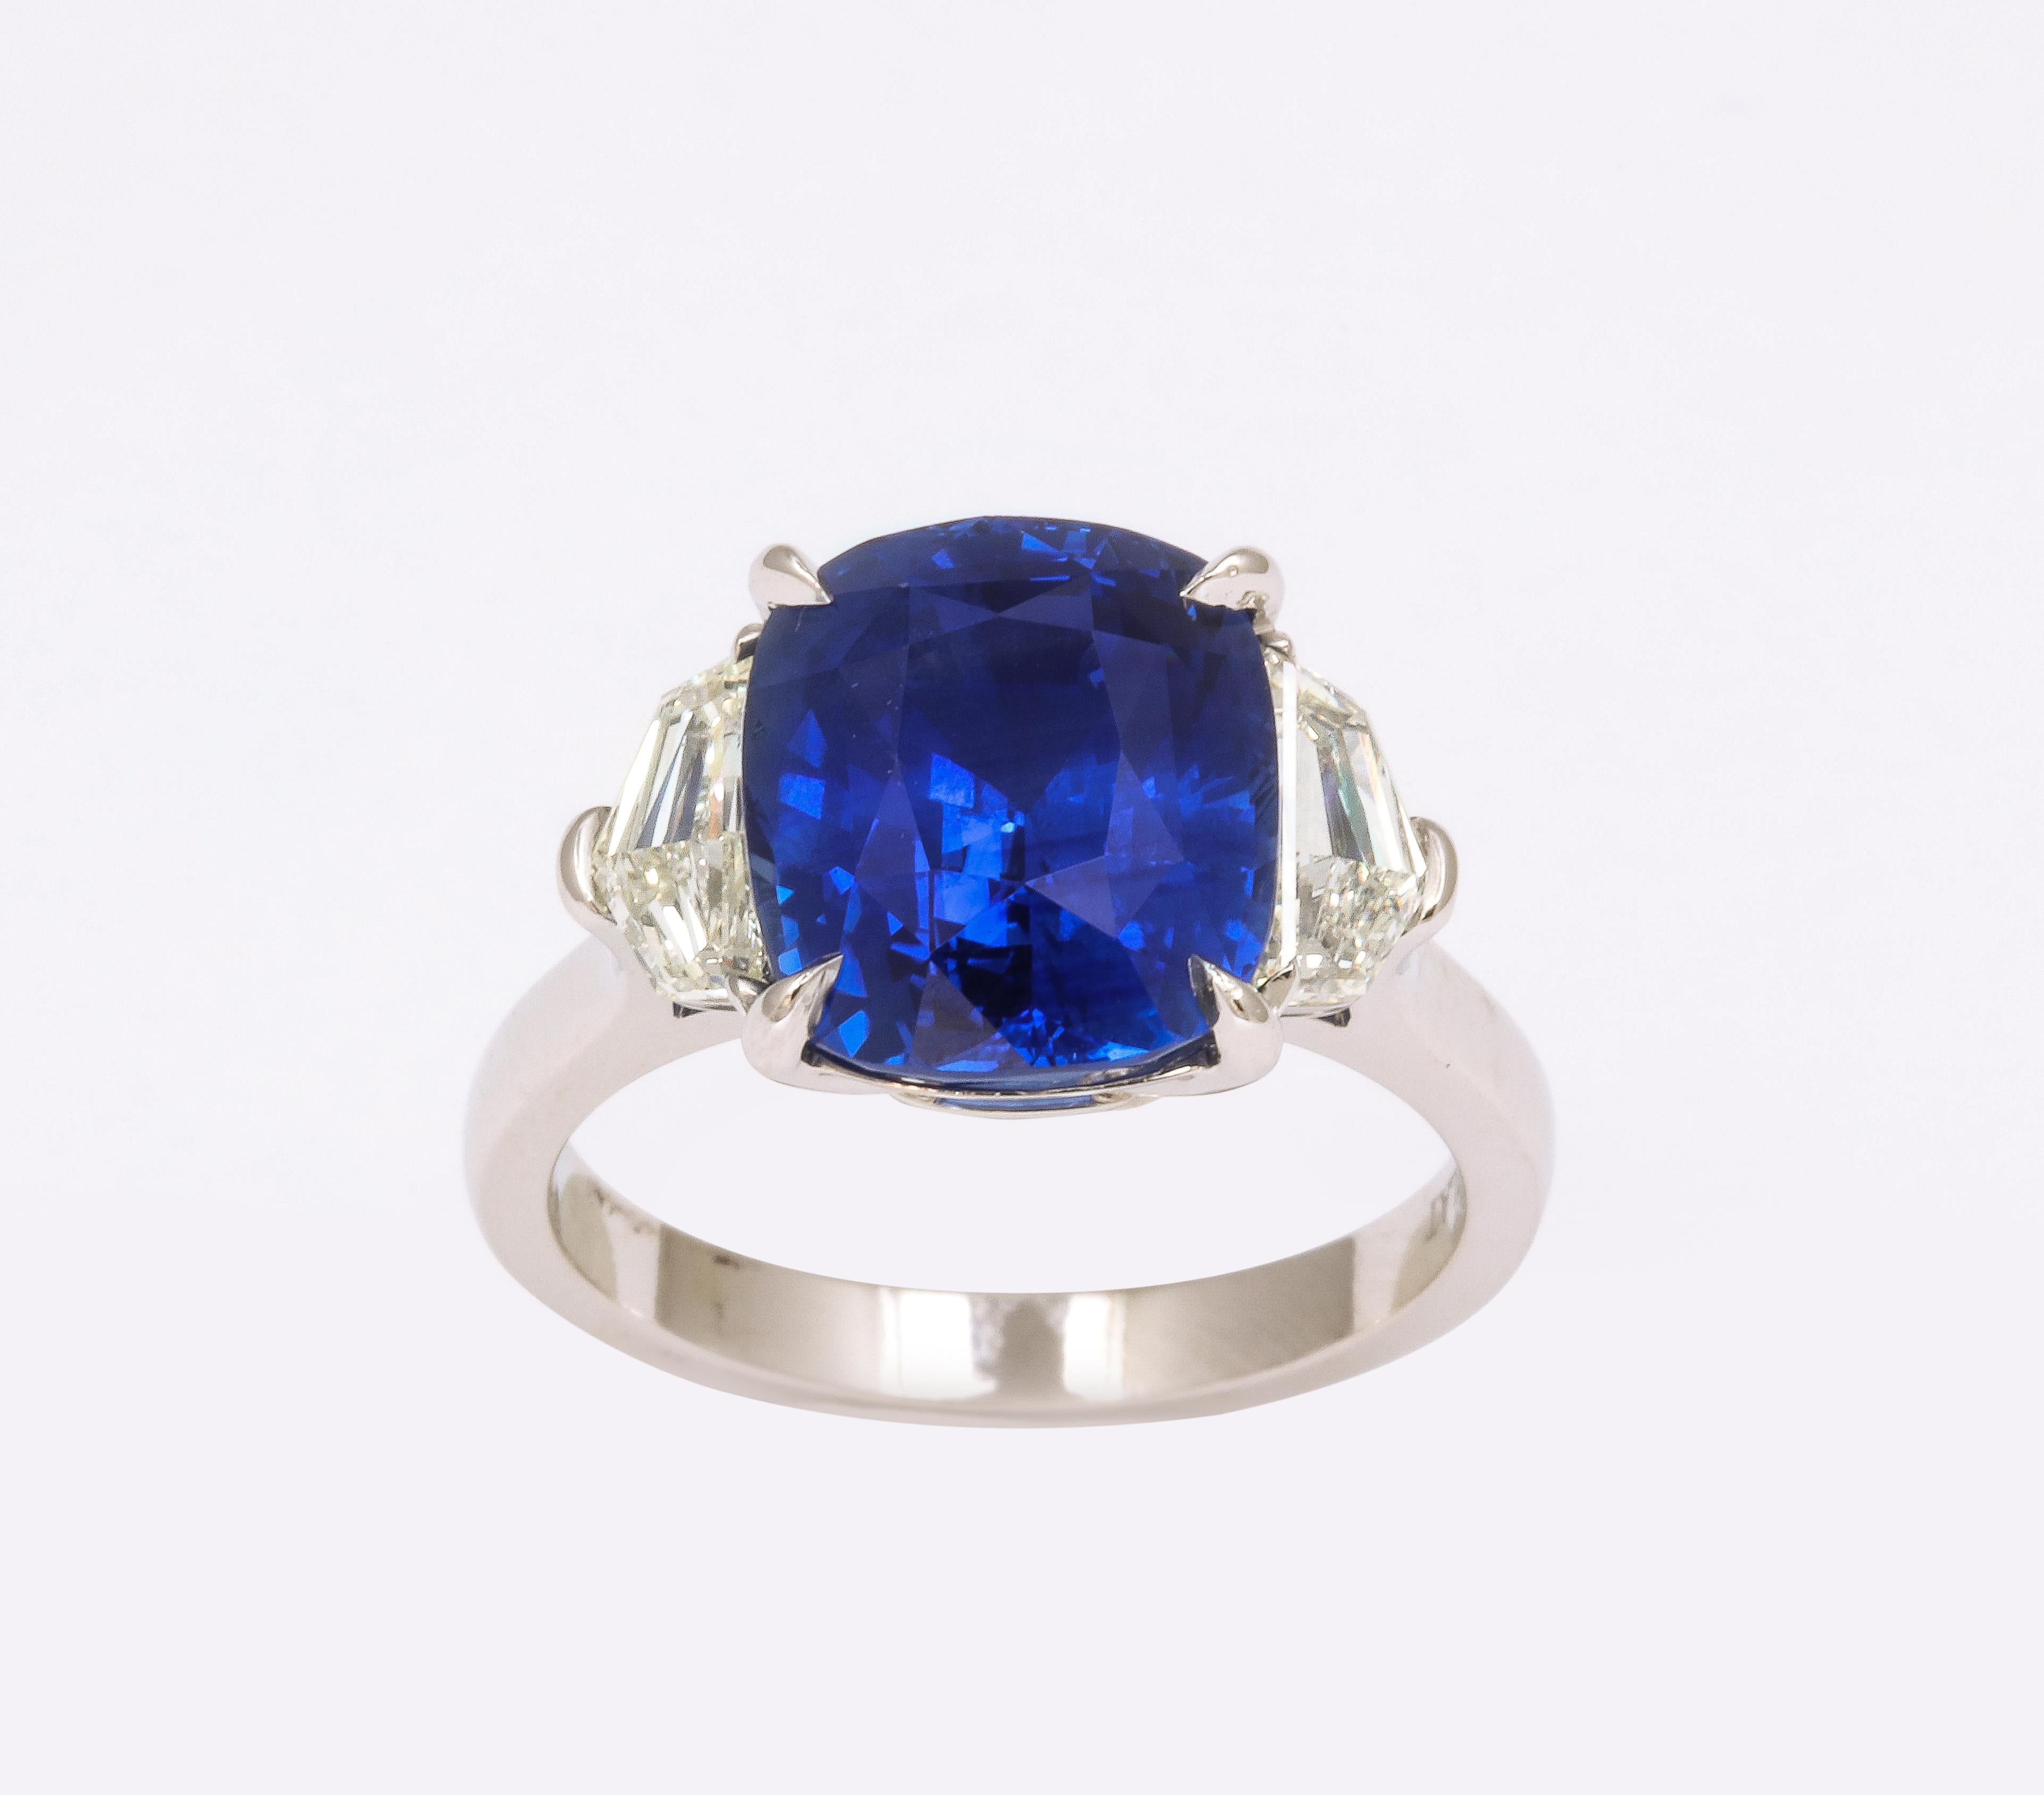 7 Carat Cushion Cut Sapphire and Diamond Ring For Sale 1